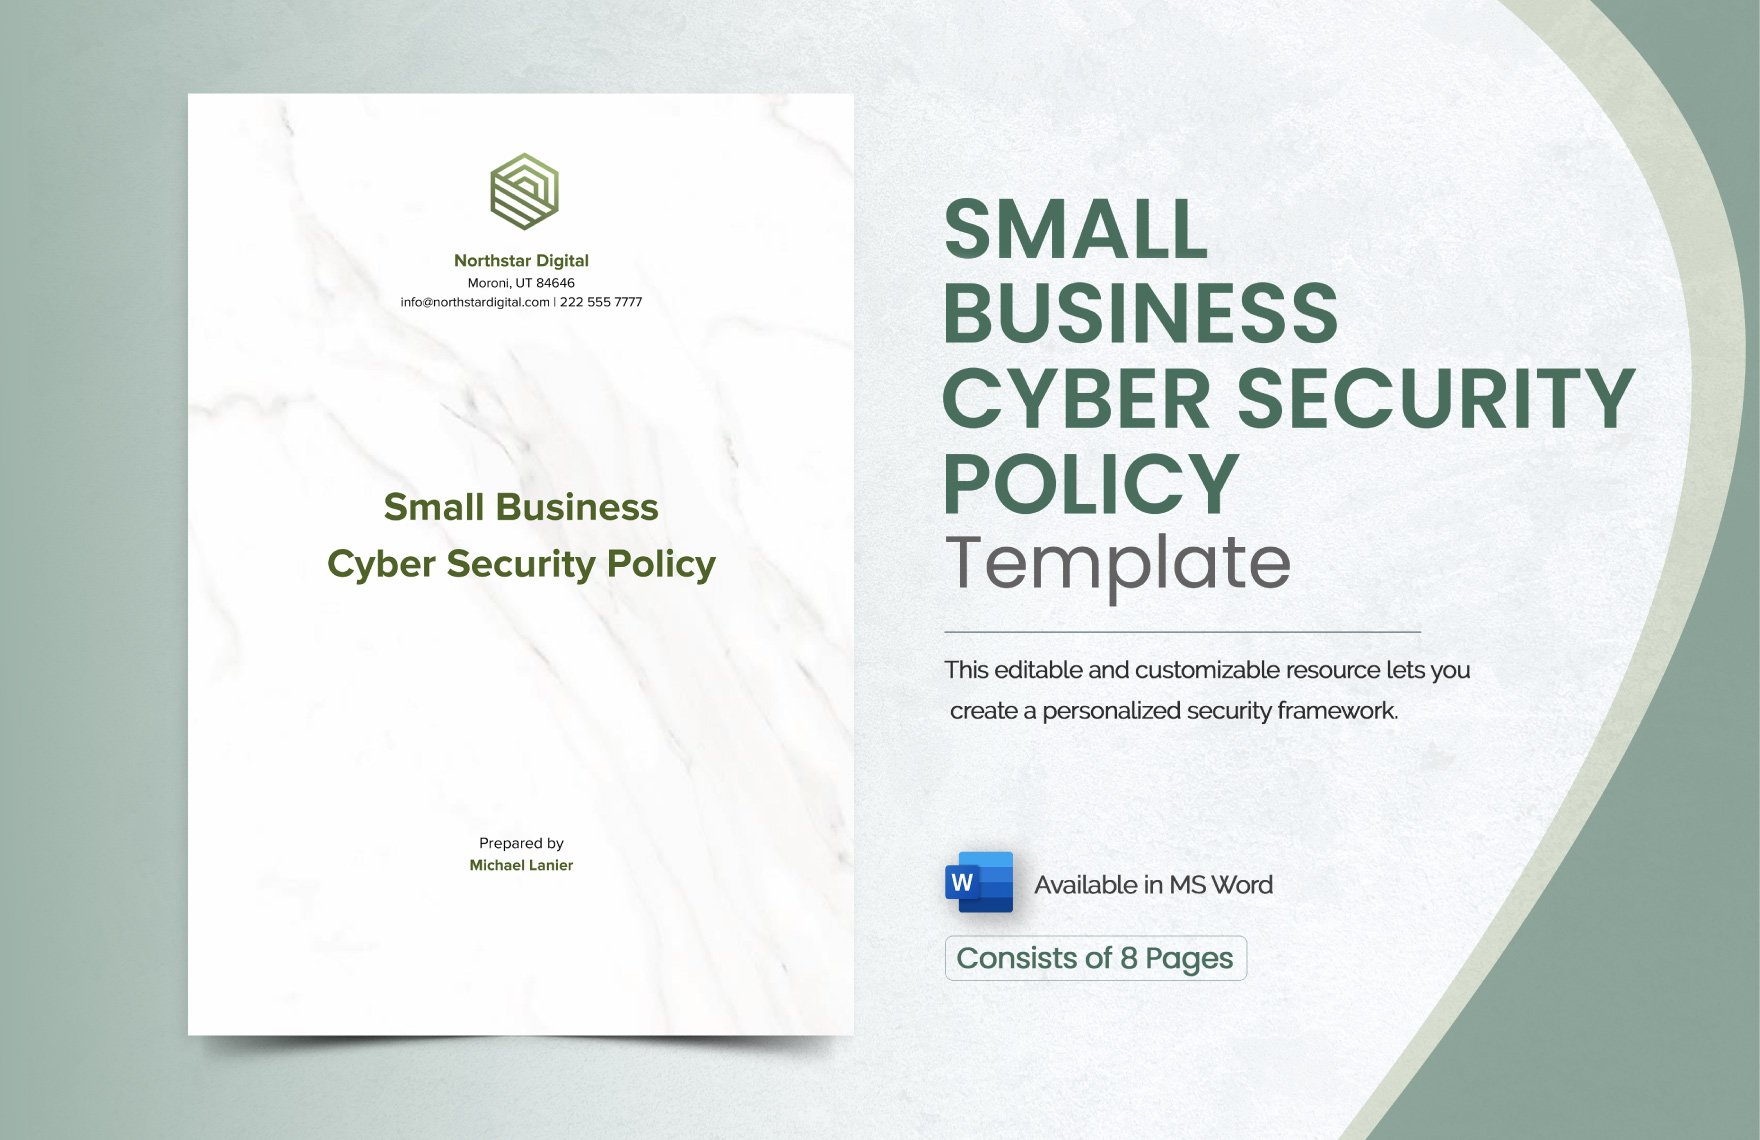 Small Business Cyber Security Policy Template